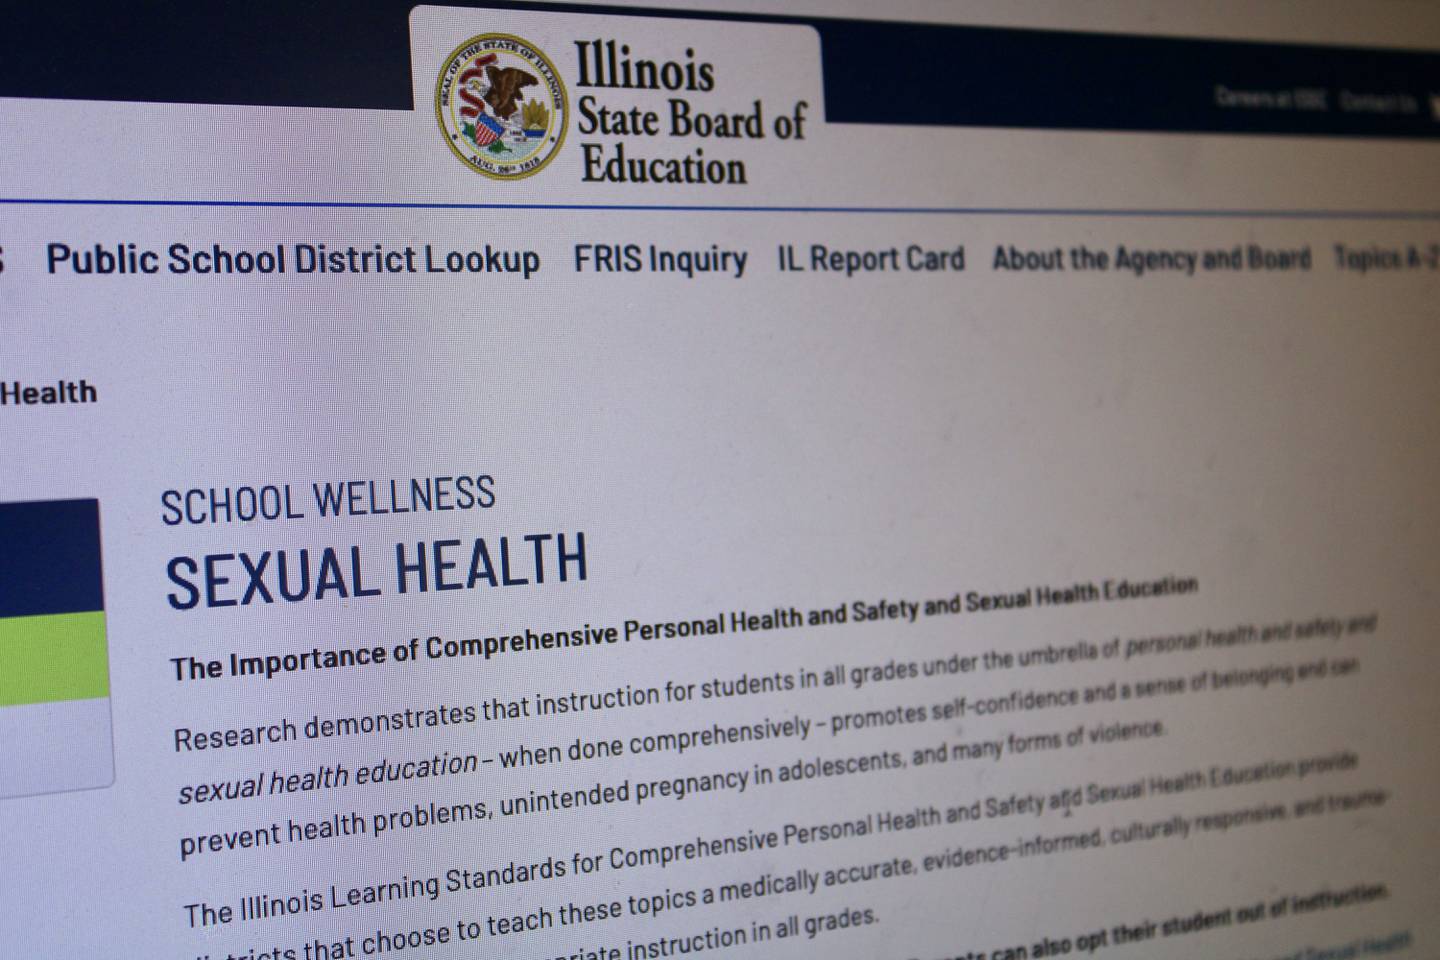 The information web page on School Wellness and Sexual Health at the Illinois State Board of Education website.